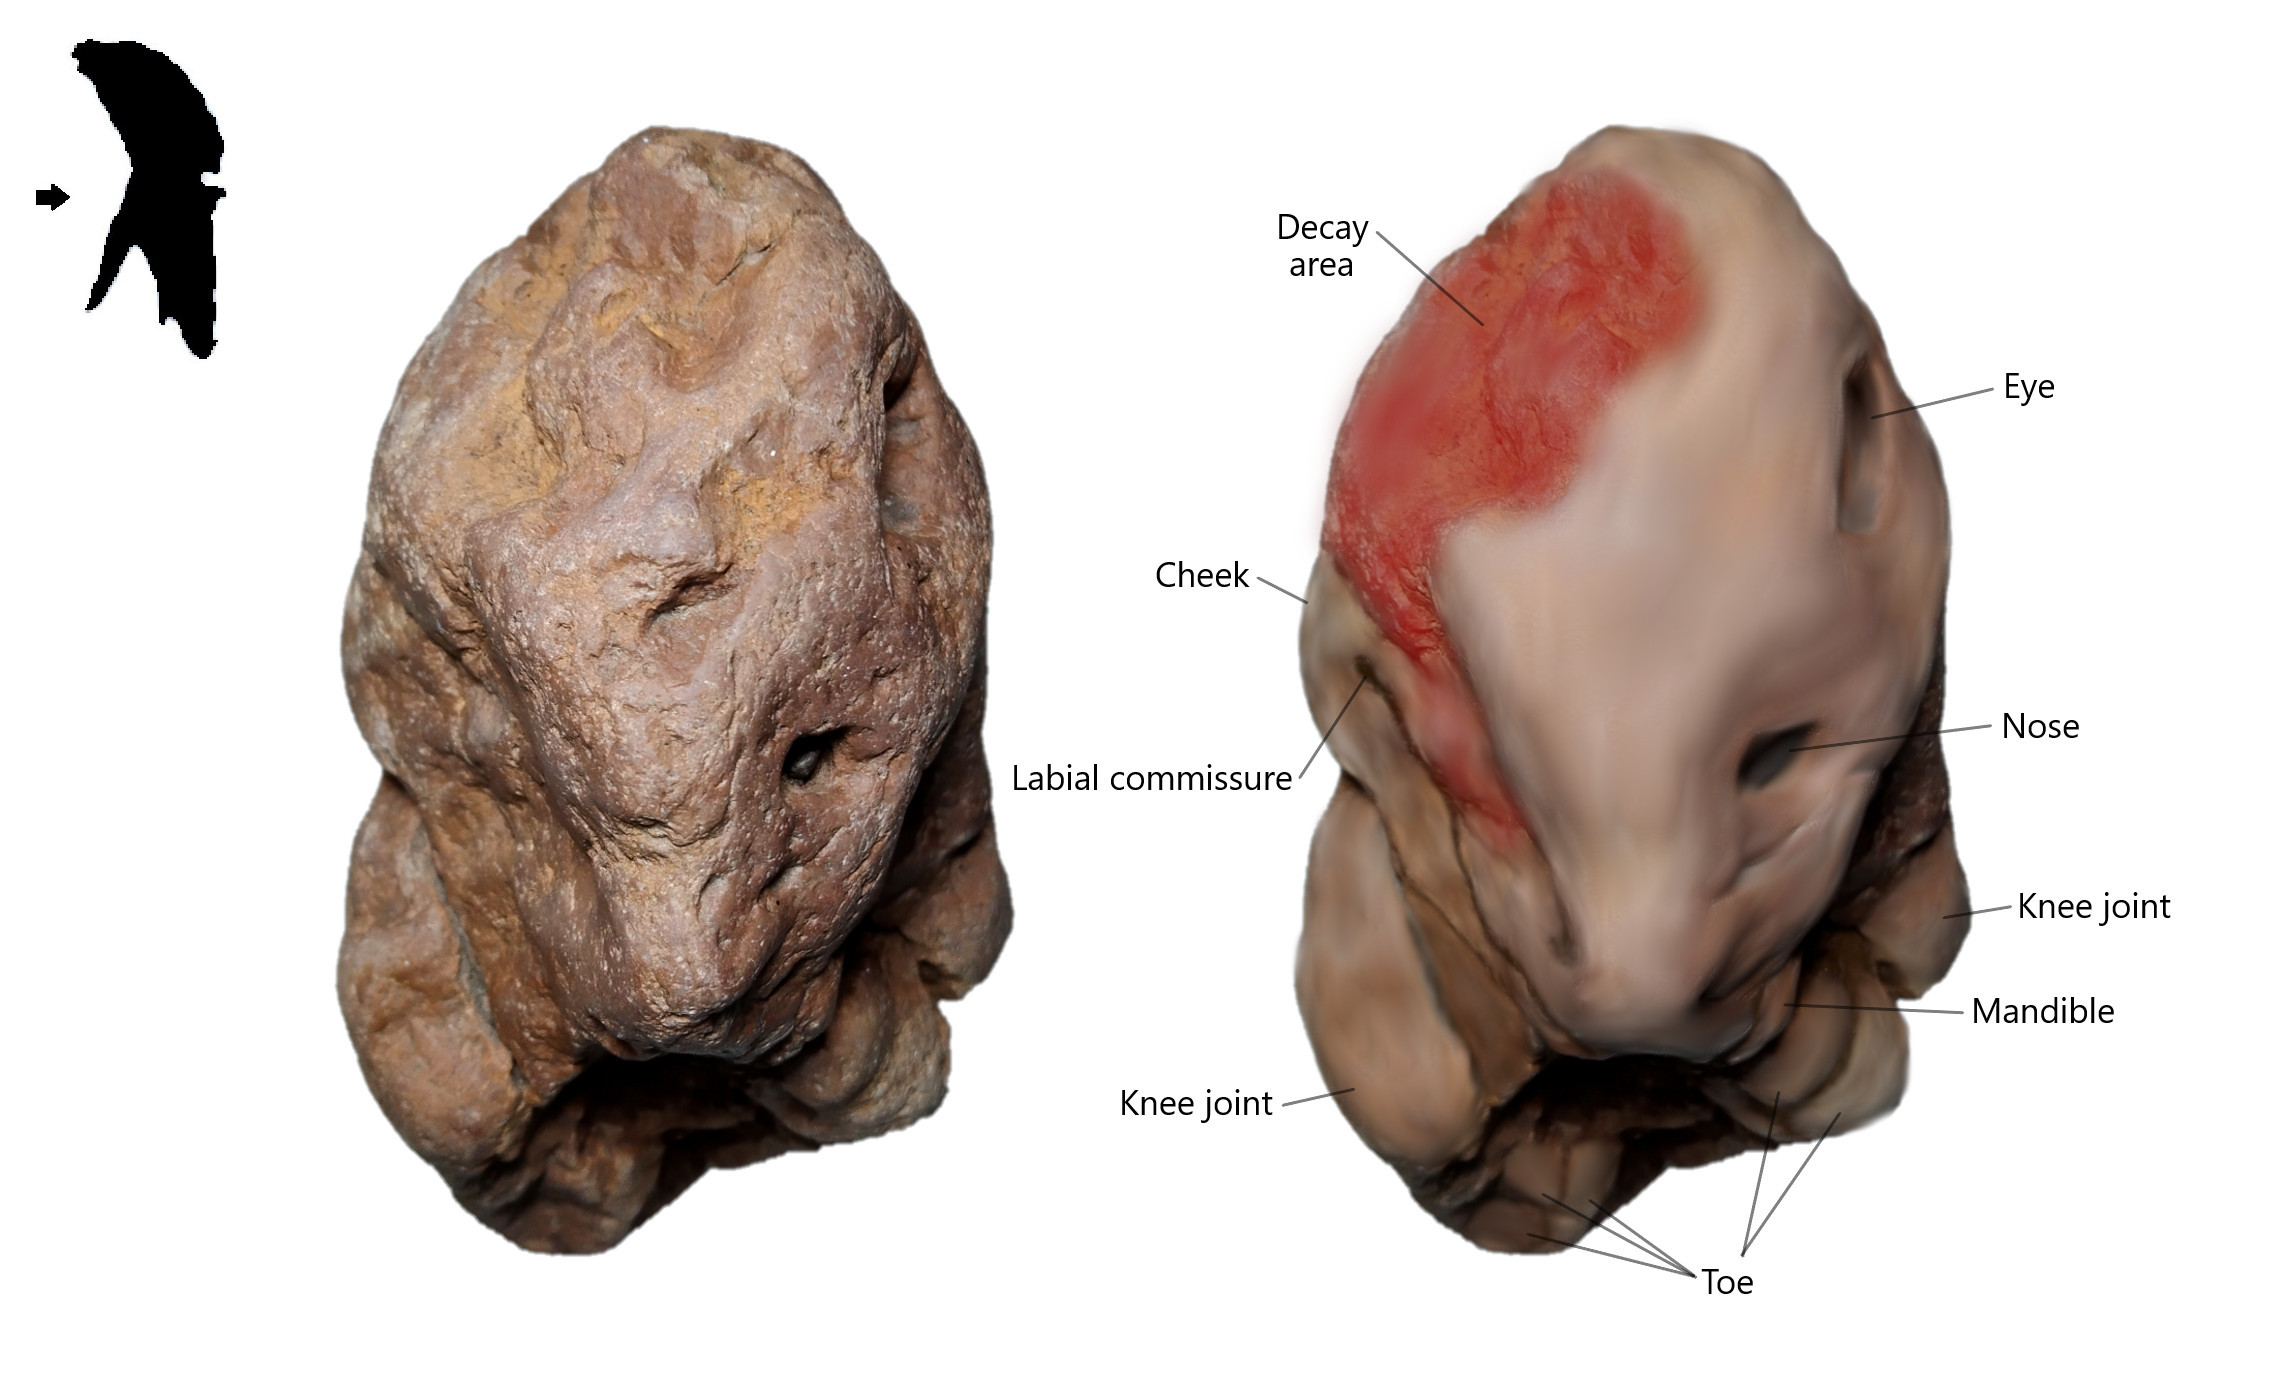 Figure 5. Top view (head) on Brachylophosaurus canadensis embryo with its restoration image.